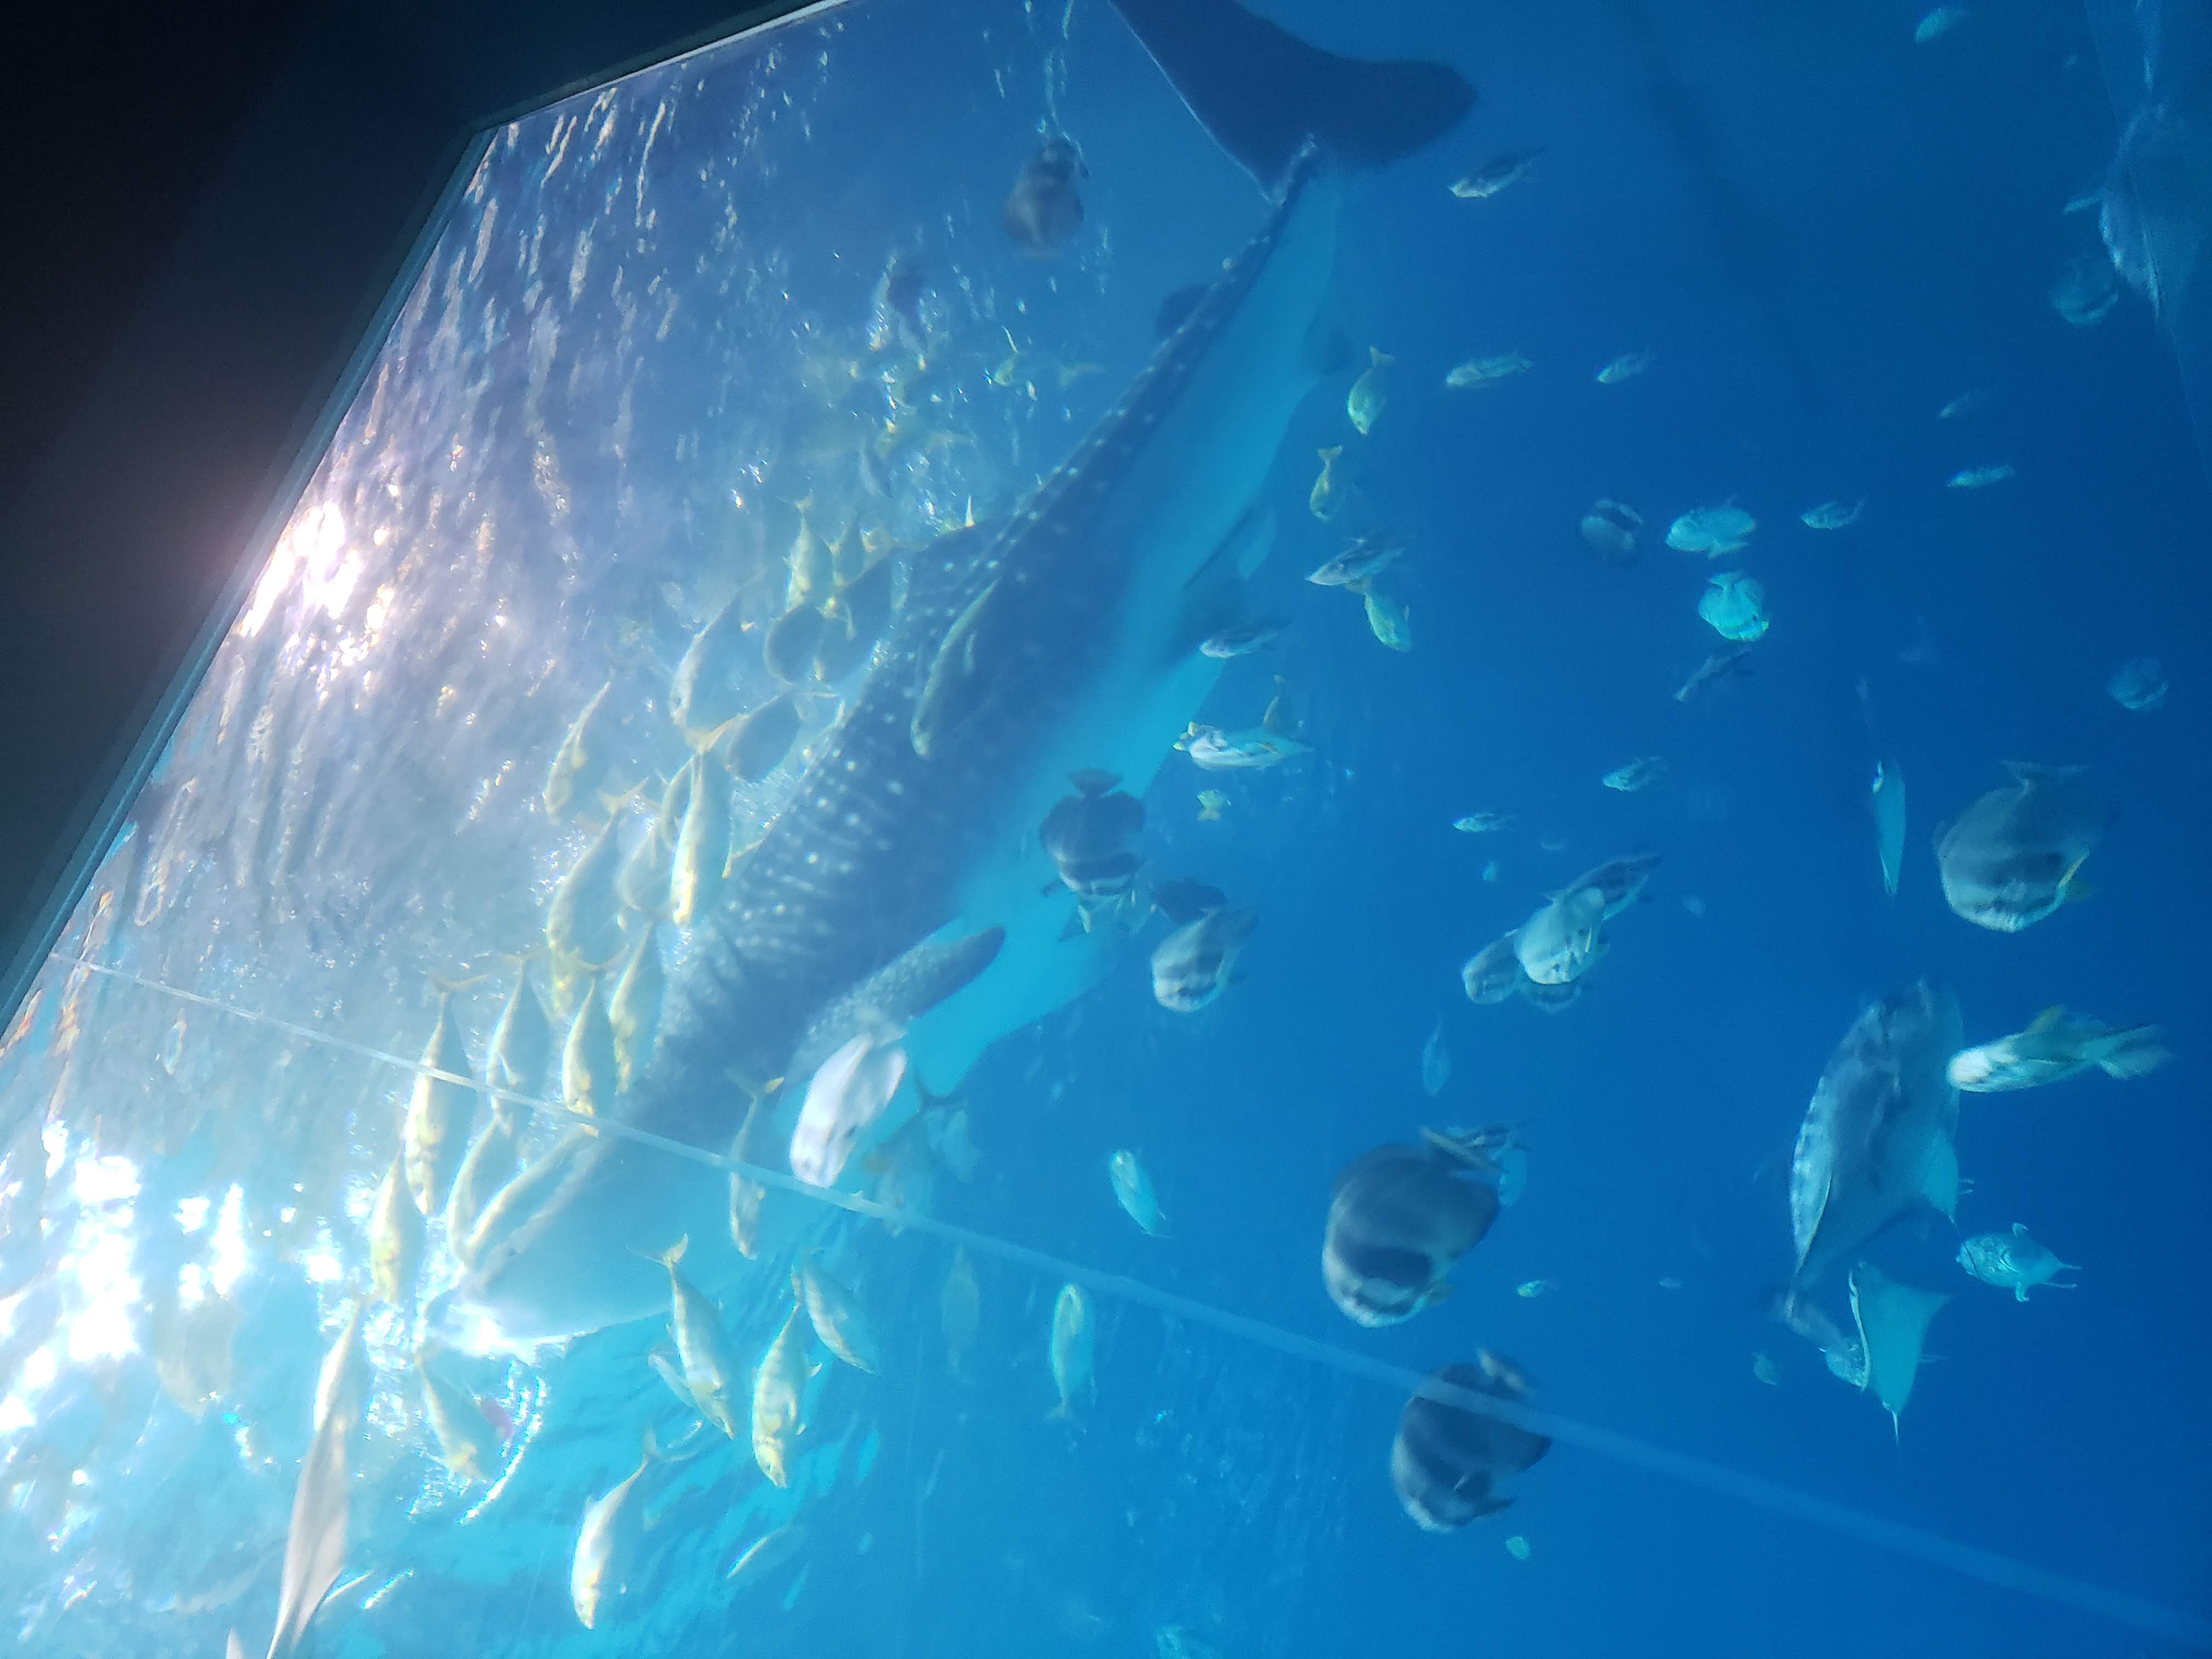 A whale shark surrounded by smaller fish in a tank